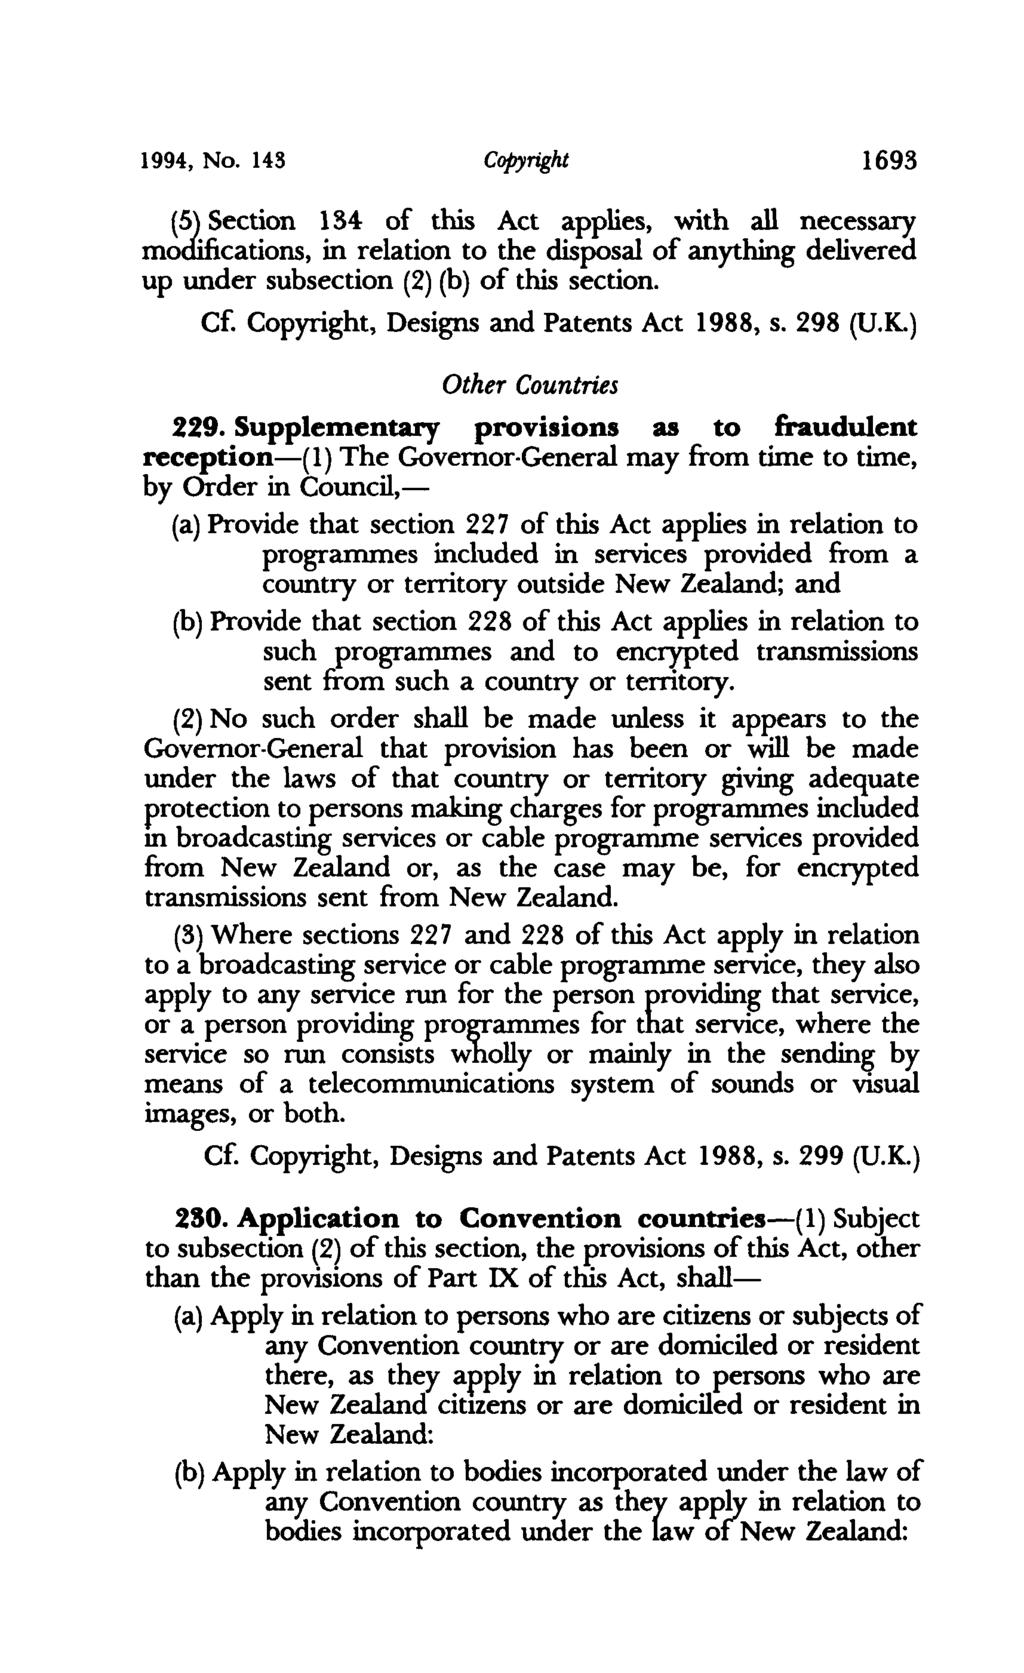 1994, No. 143 COPYright 1693 (5) Section 134 of this Act applies, with all necessary modifications, in relation to the disposal of anything delivered up under subsection (2) (b) of this section.